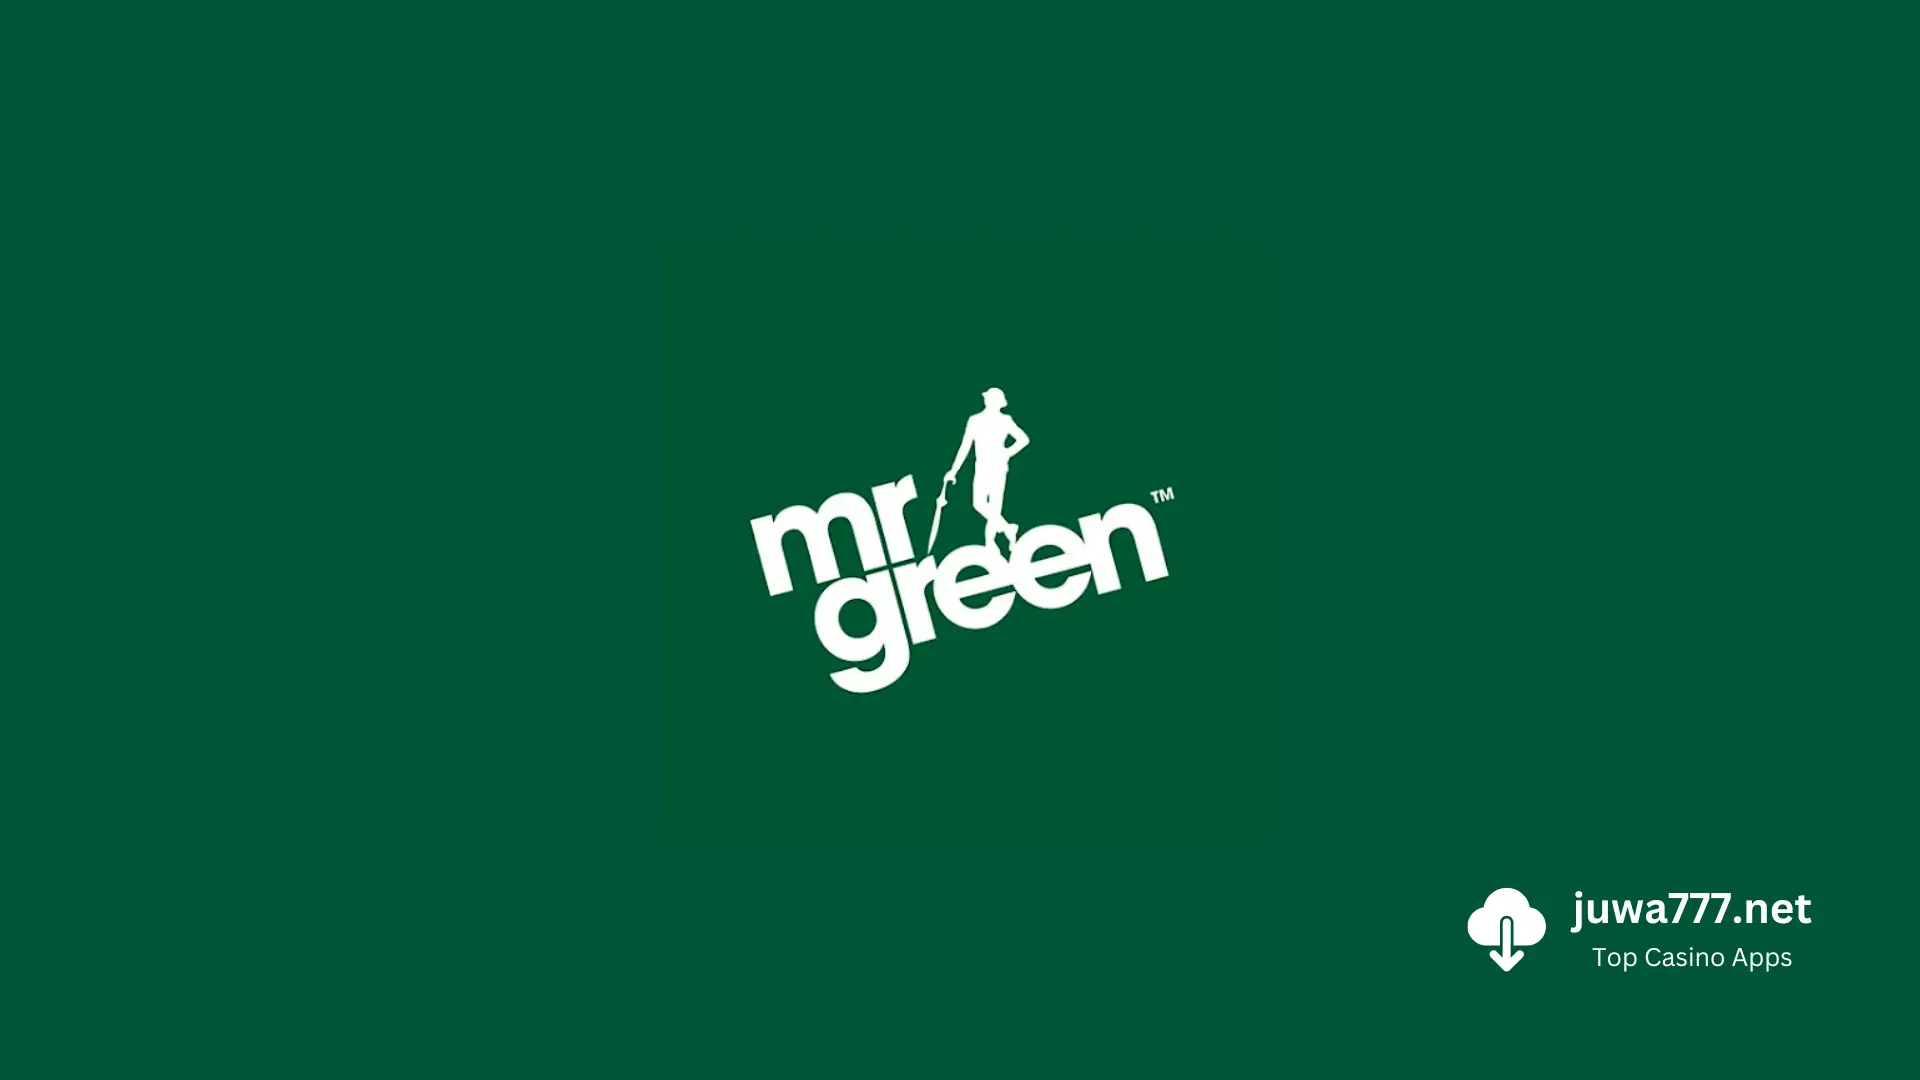 mr green online casino app - download for Android and IOS